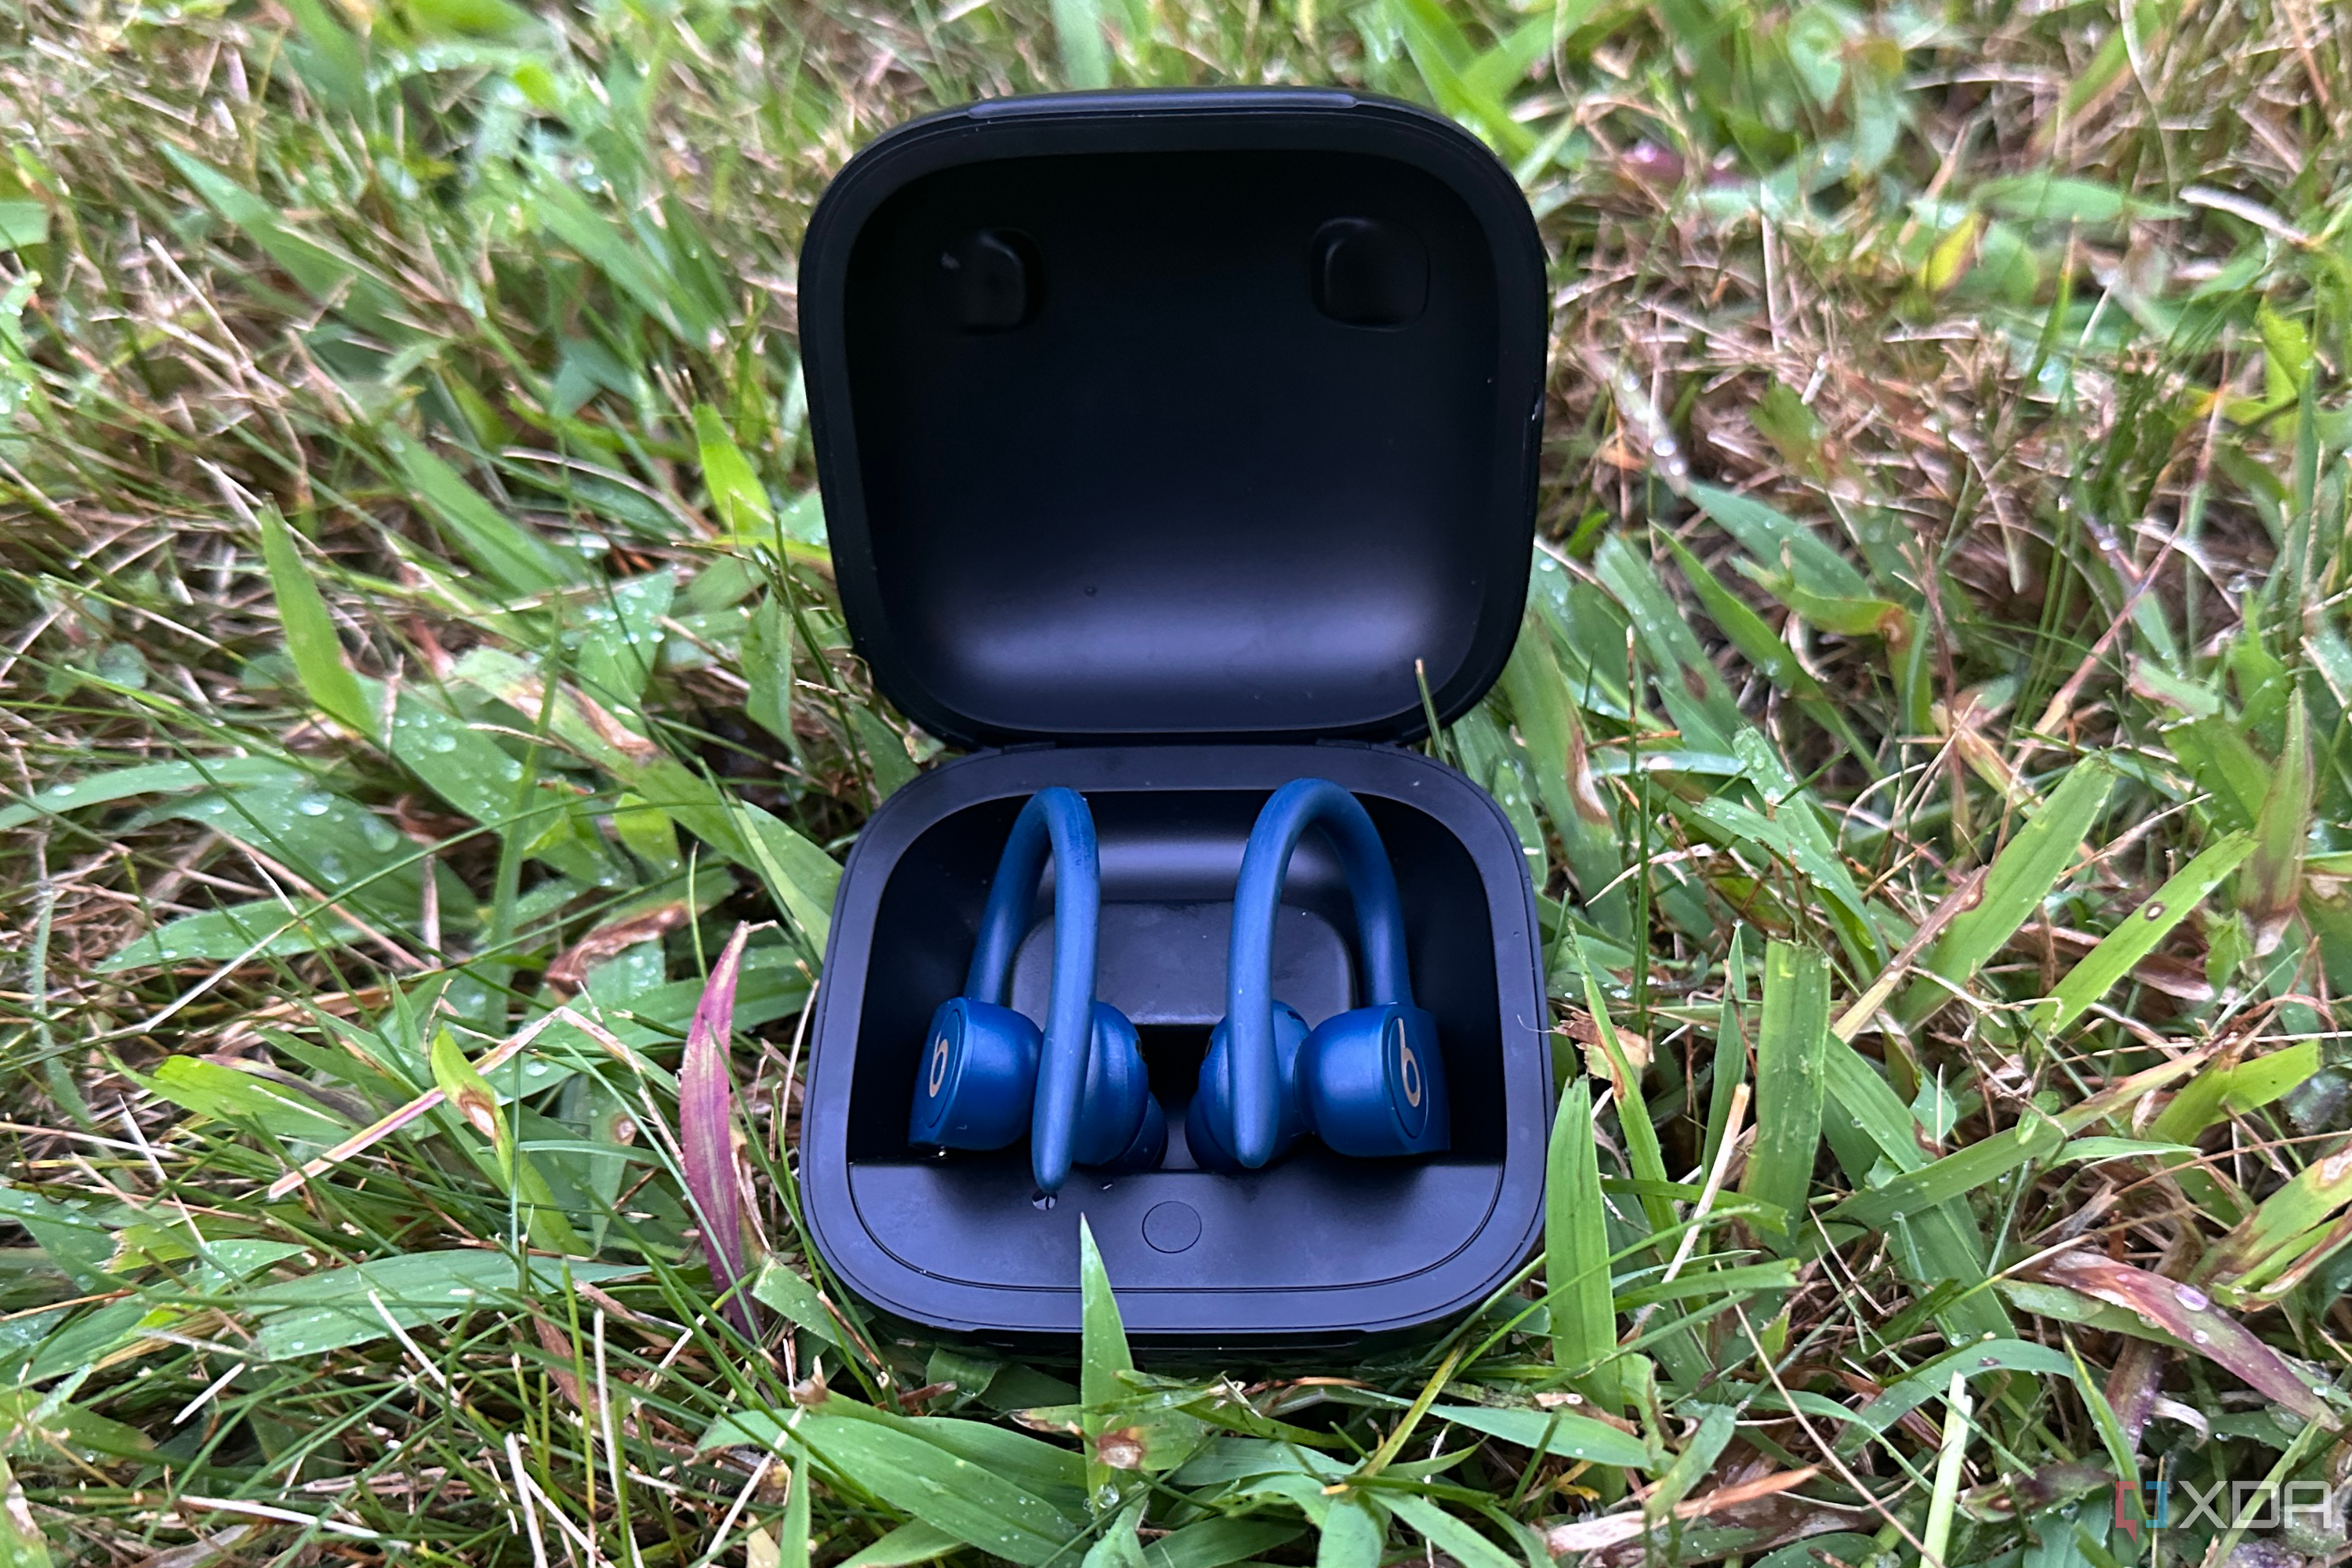 The Powerbeats Pro in their case on wet grass. 